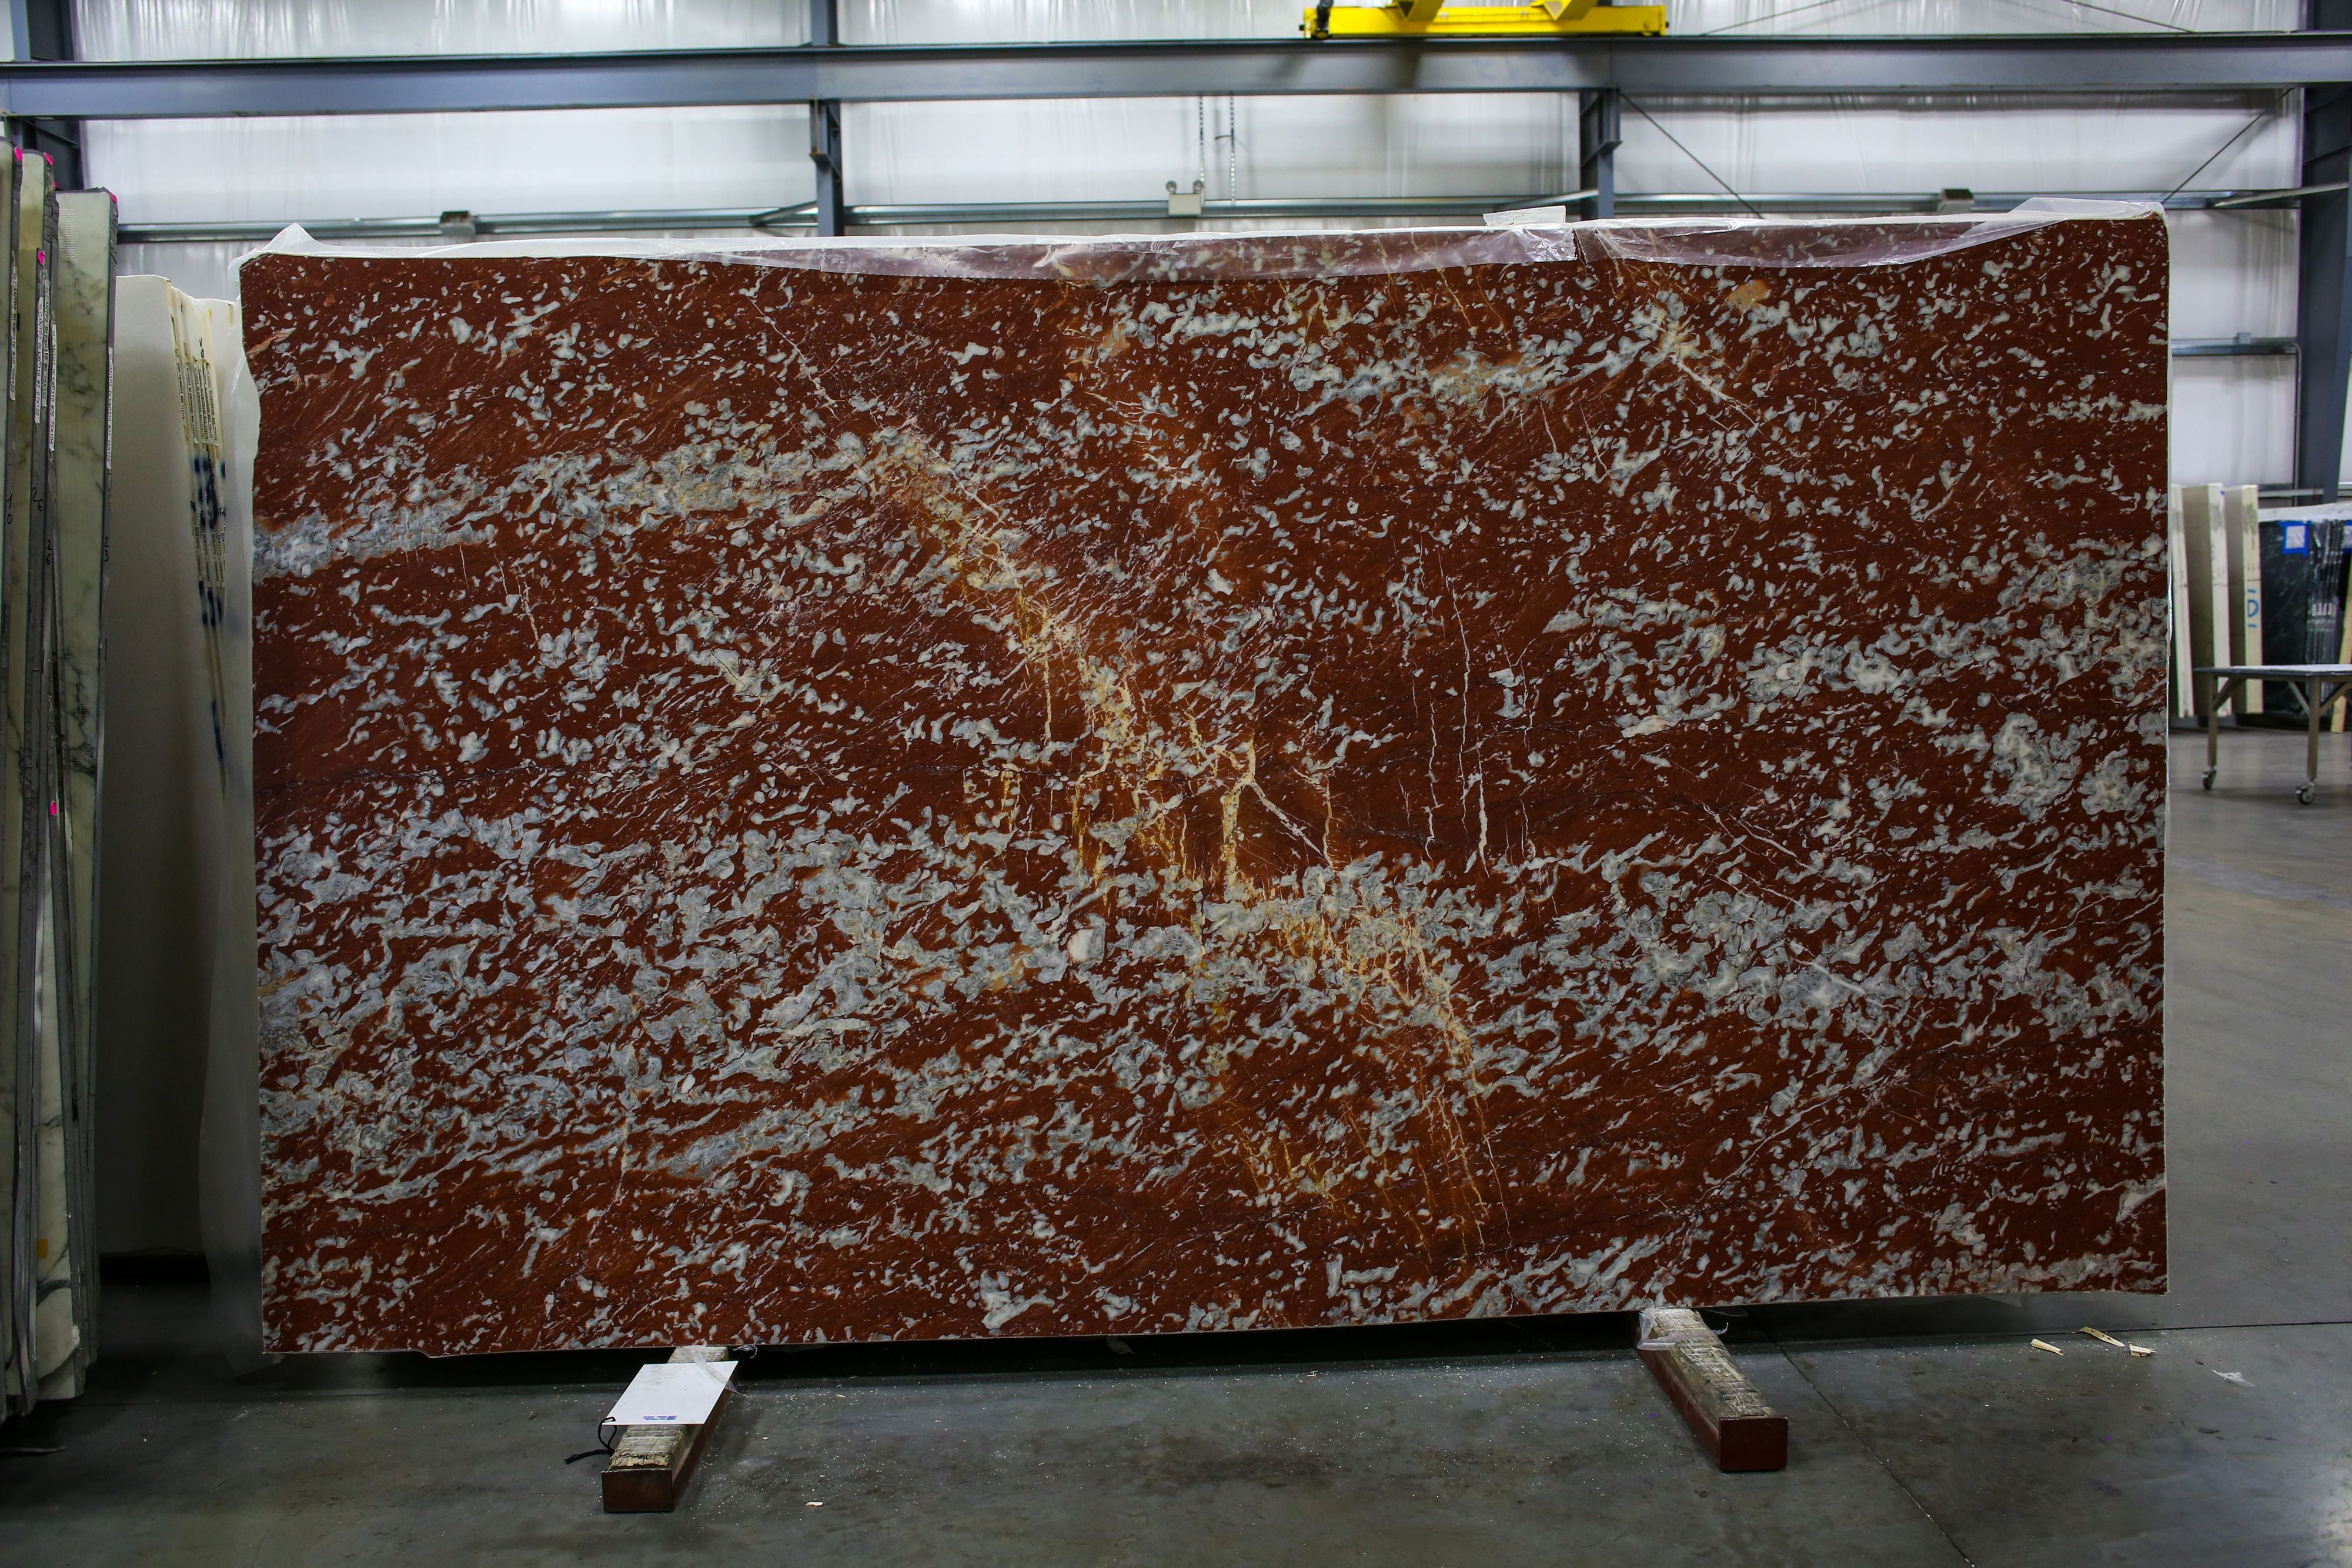  Rosso Francia Marble Slab 3/4  Honed Stone - 55190#07 -  71X112 